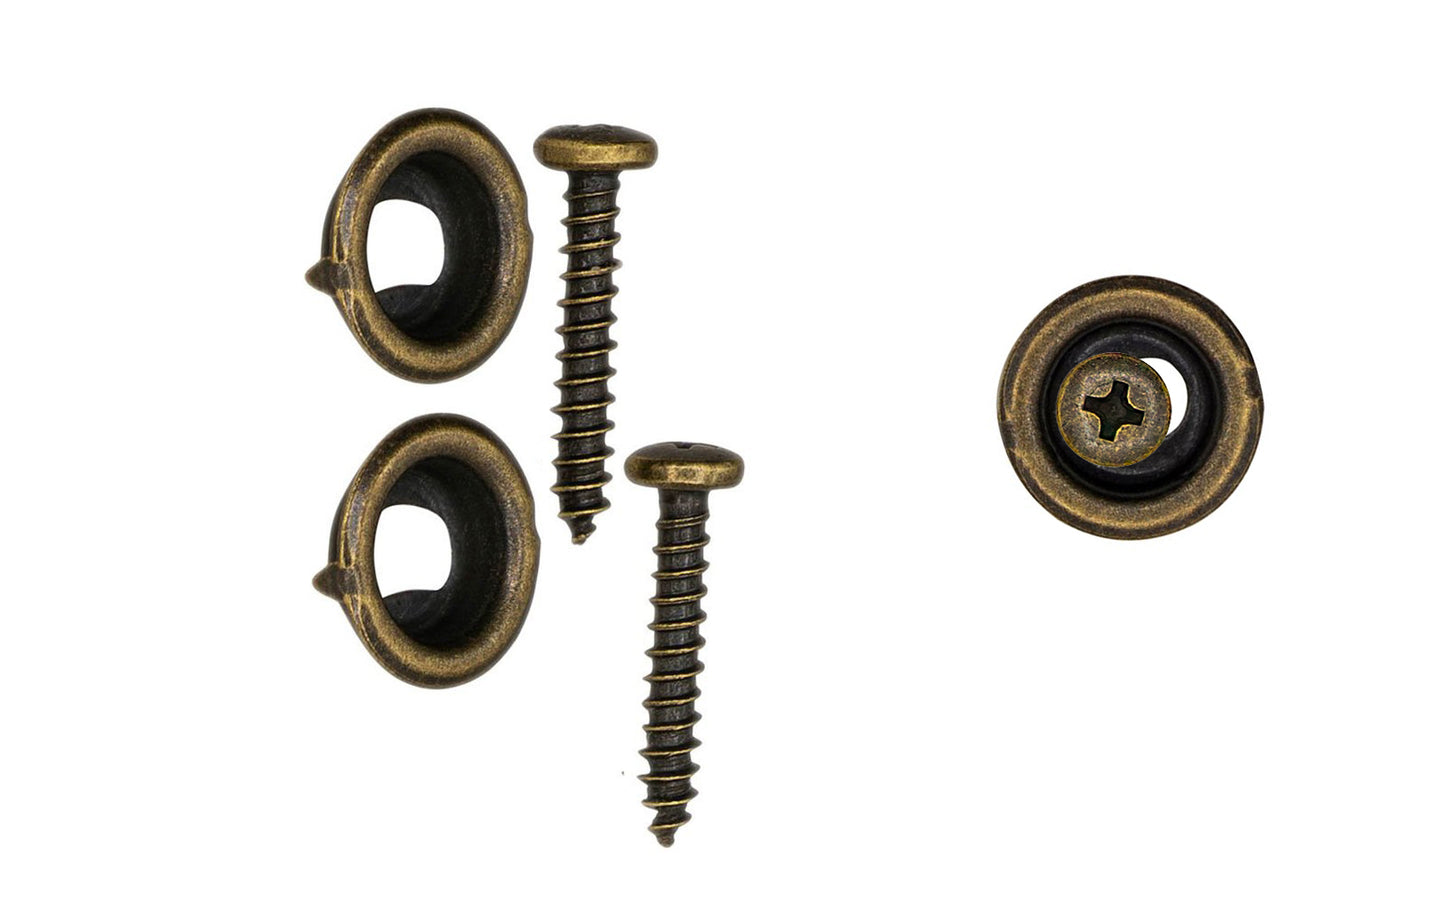 Vintage-style Hardware · Solid Brass Sash Stop Bead Adjusters - Pair. Made of solid brass - Allows 1/8" sideways adjustment - 11/16" Diameter. Allows for easy removal of interior stops of sash windows for repairs, refinishing, & adjustment of windows for smooth operation, especially during seasonal weather changes. Antique Brass Finish.